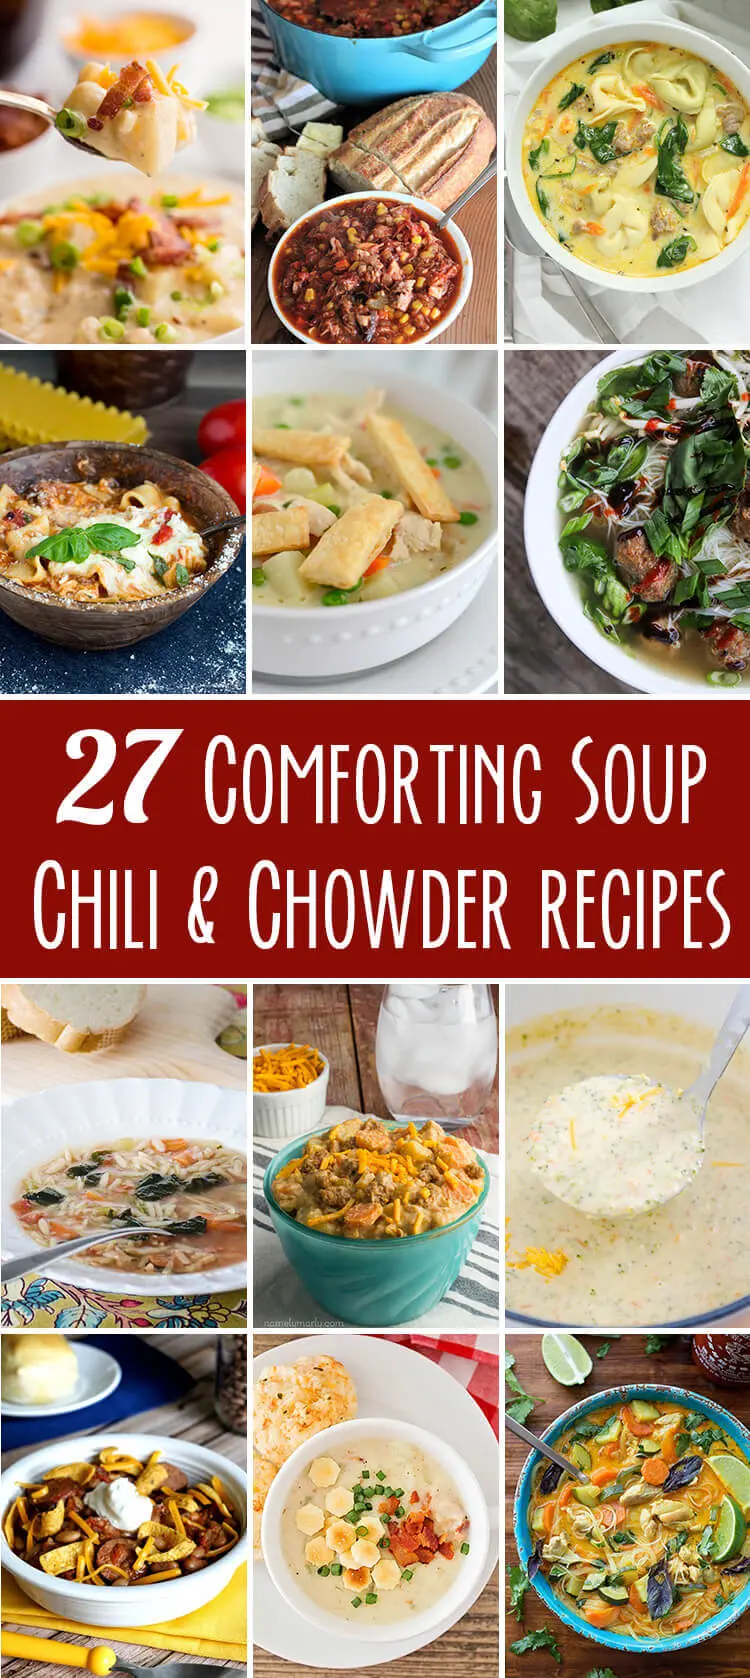 A collage of photos showing soup with the text, "Celebrate National Soup Day with these 27 (and then some) comforting soup and chili and chowder recipes!"